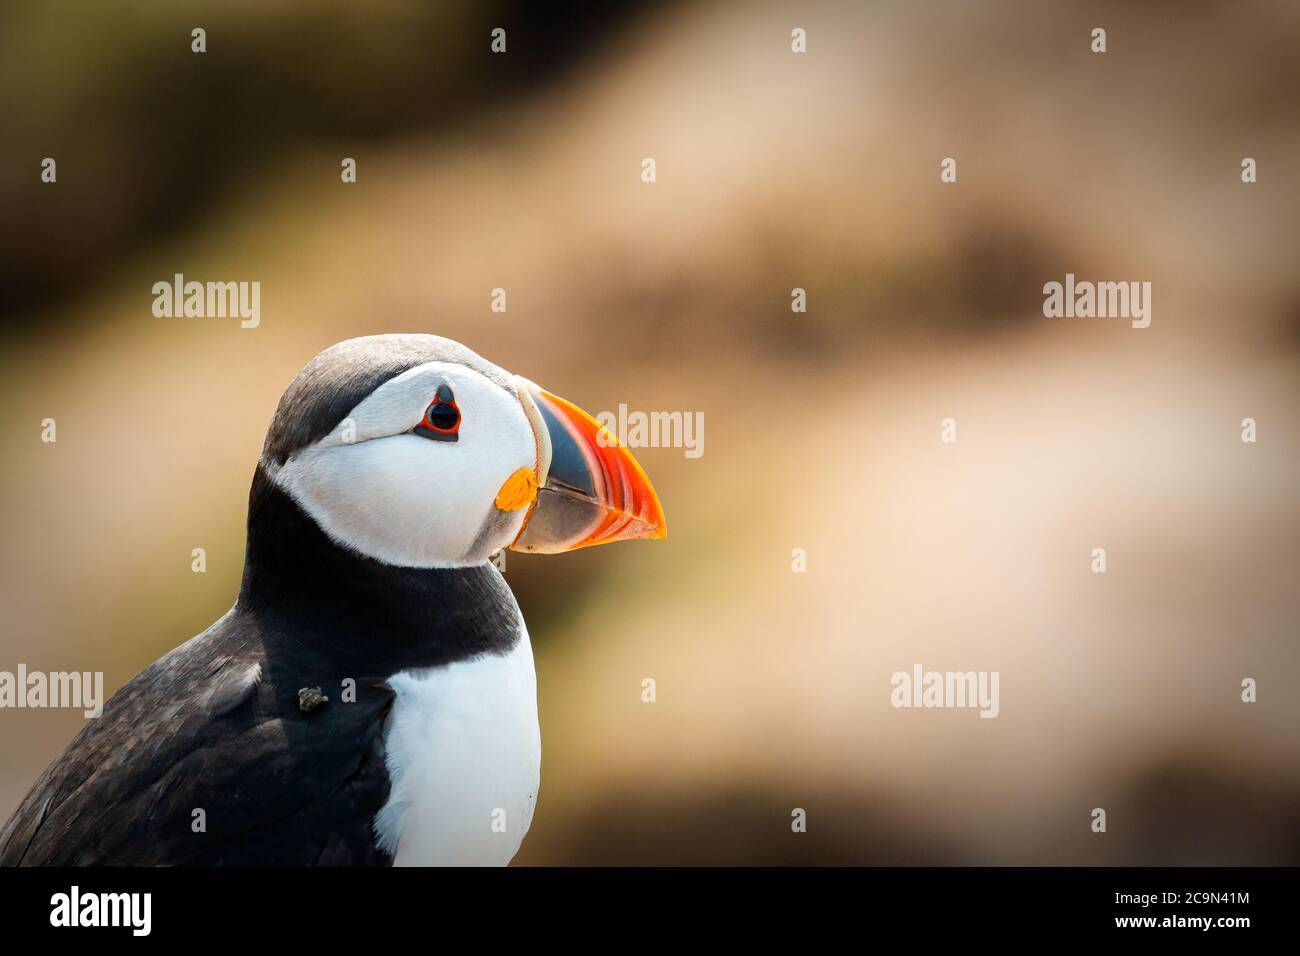 Headshot of a puffin (Fratercula arctica) looking across showing the vivid colours of its beak as it sits in the Summer sun Stock Photo